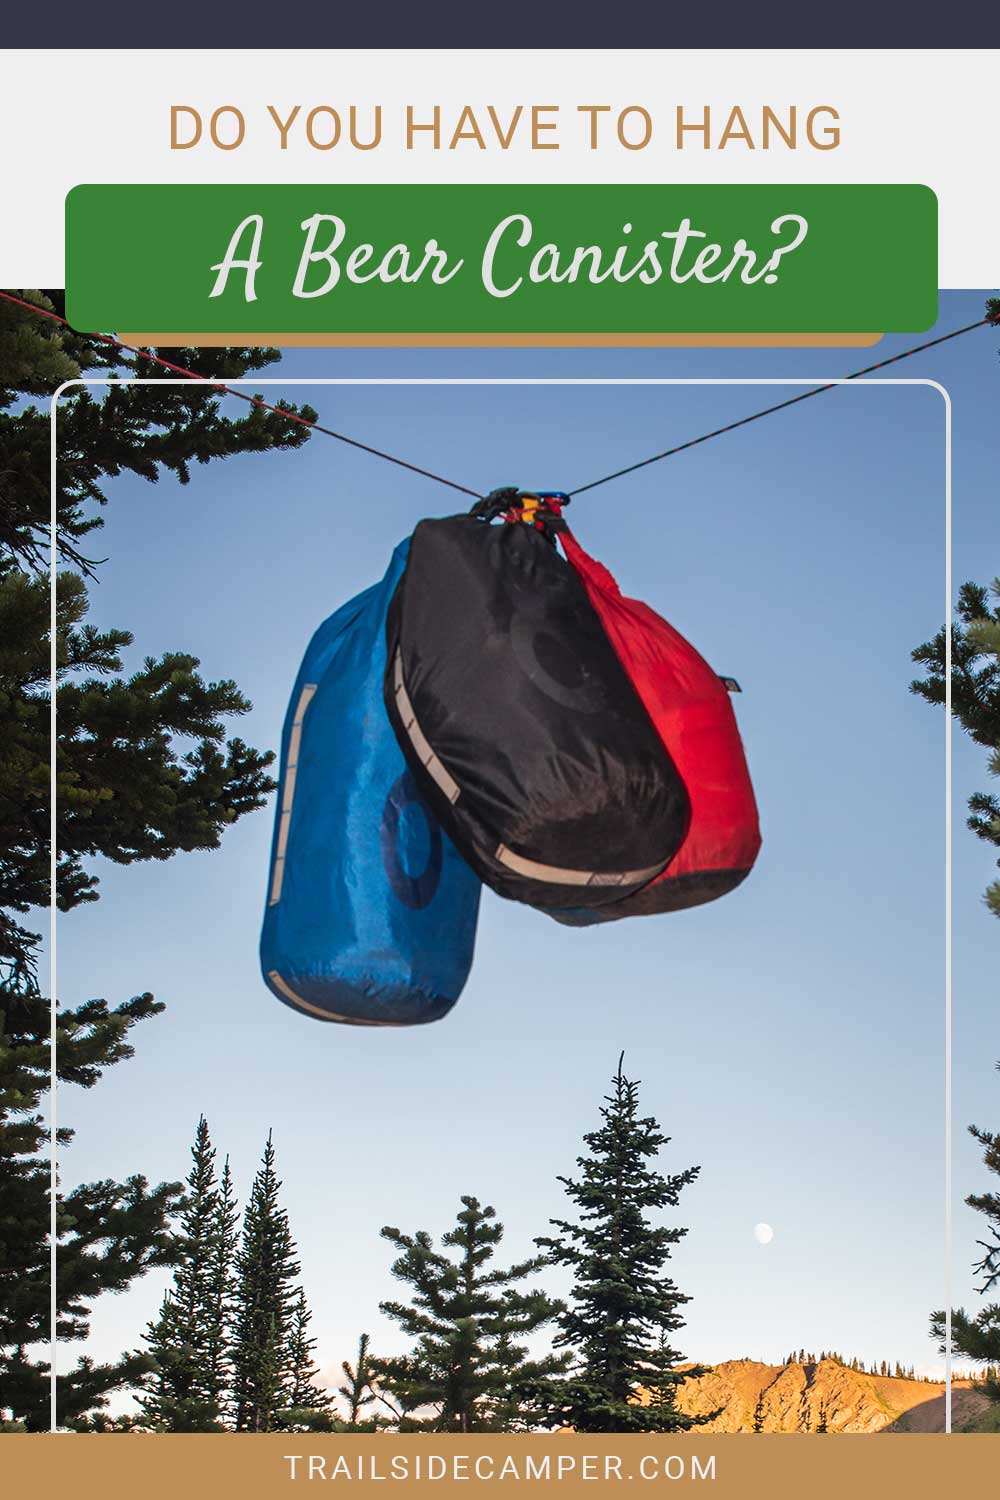 Do You Have To Hang A Bear Canister?